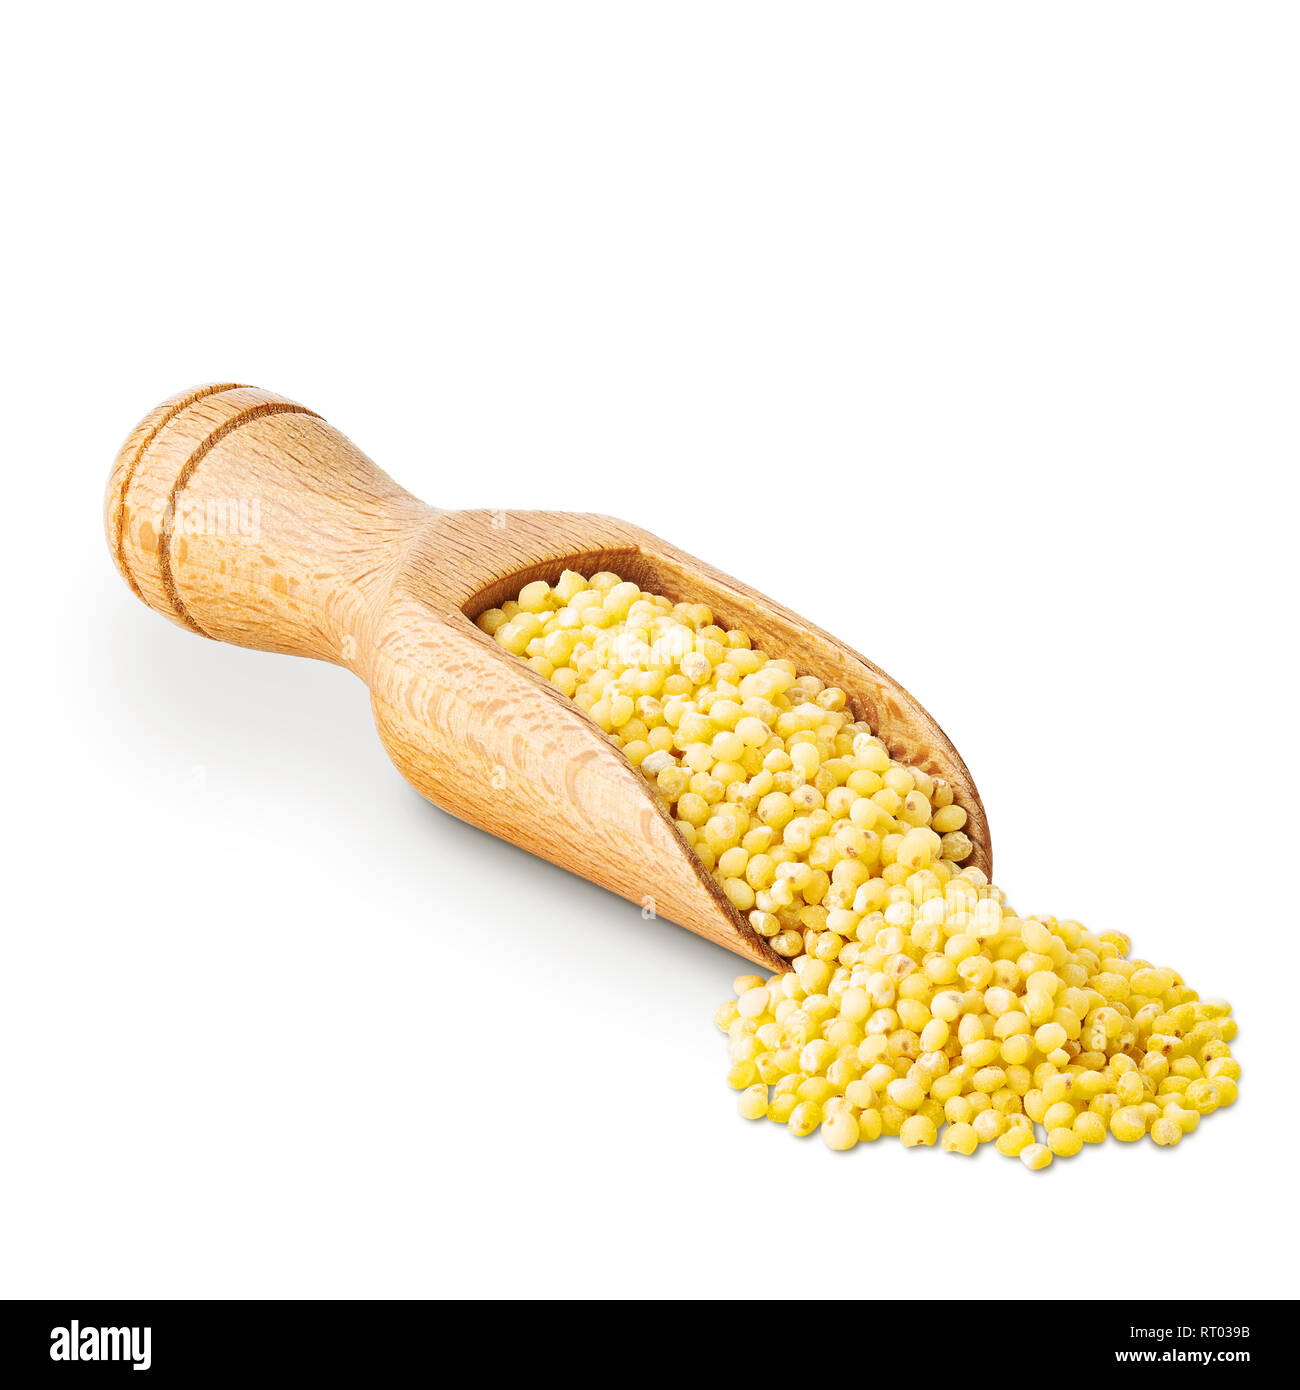 Millet in a wooden scoop isolated on white Stock Photo